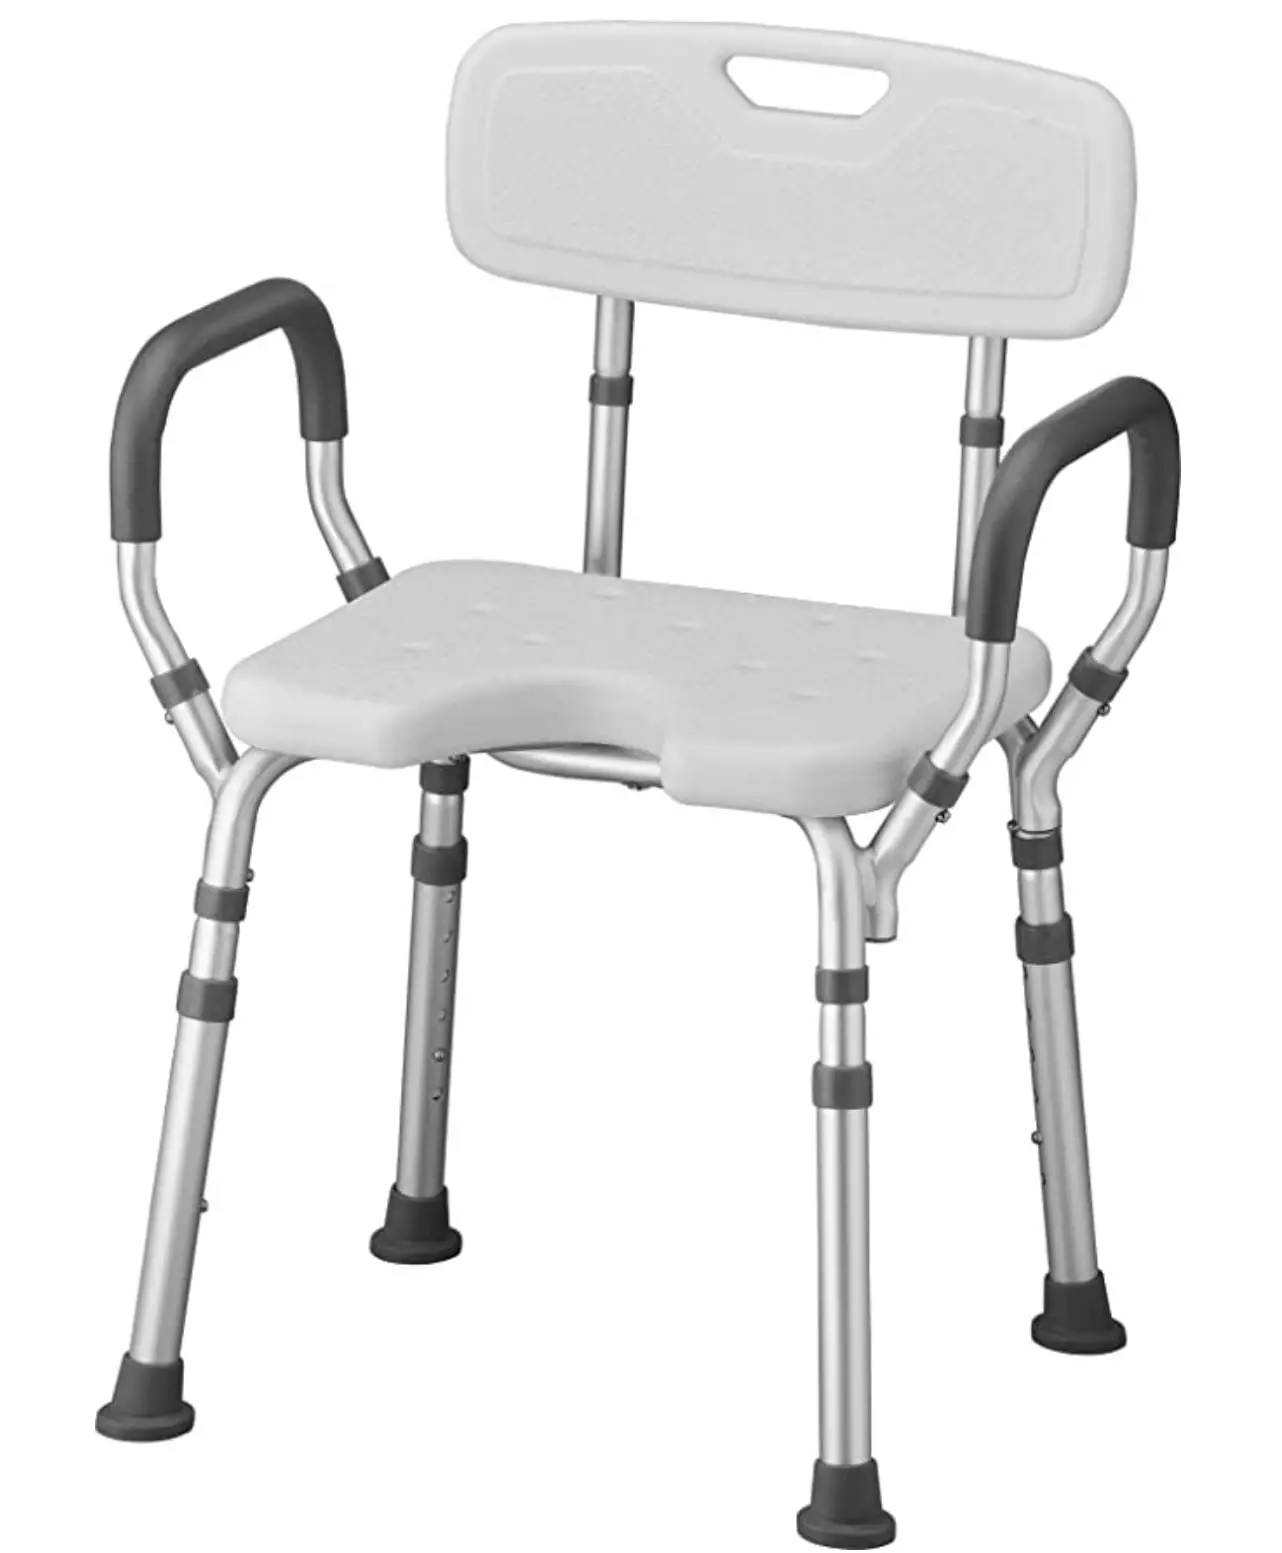 Does Medicare Cover Shower Chairs?